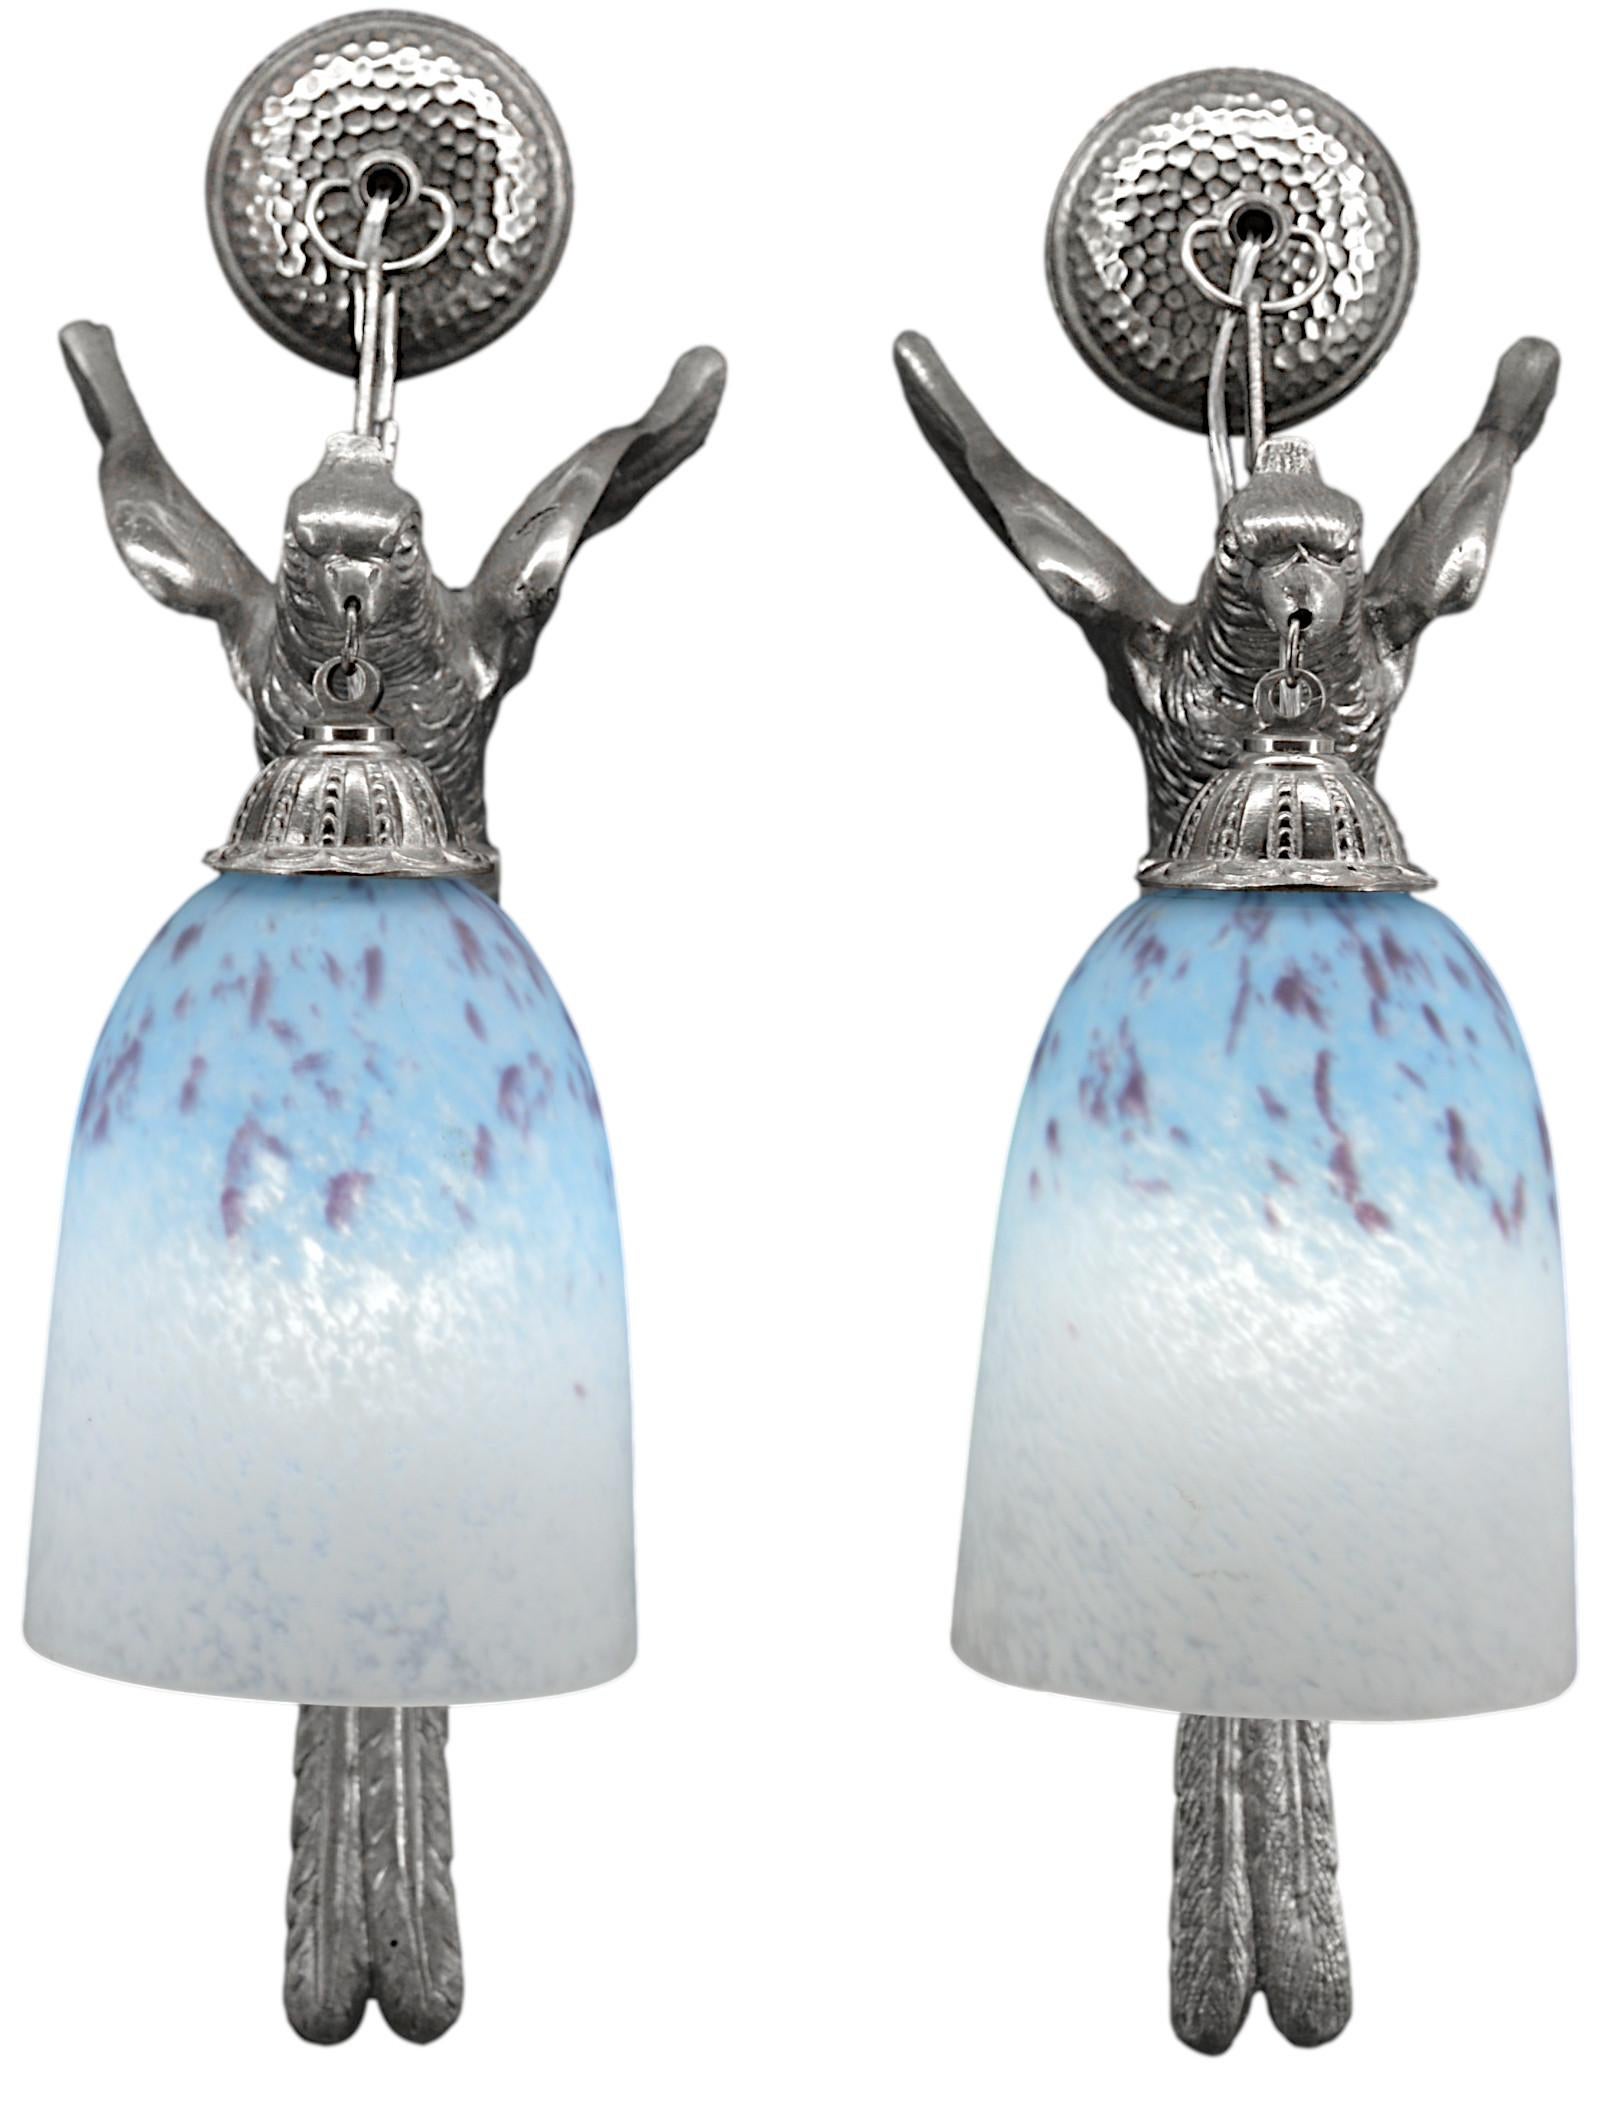 French Art Deco wall sconce by Charles Schneider, Epinay-sur-Seine (Paris), 1928-1929. An additional pair can be acquired on 1stdibs (see our 1stdibs sales). So, a set of three is possible. Mottled glass shade, powders are applied between two